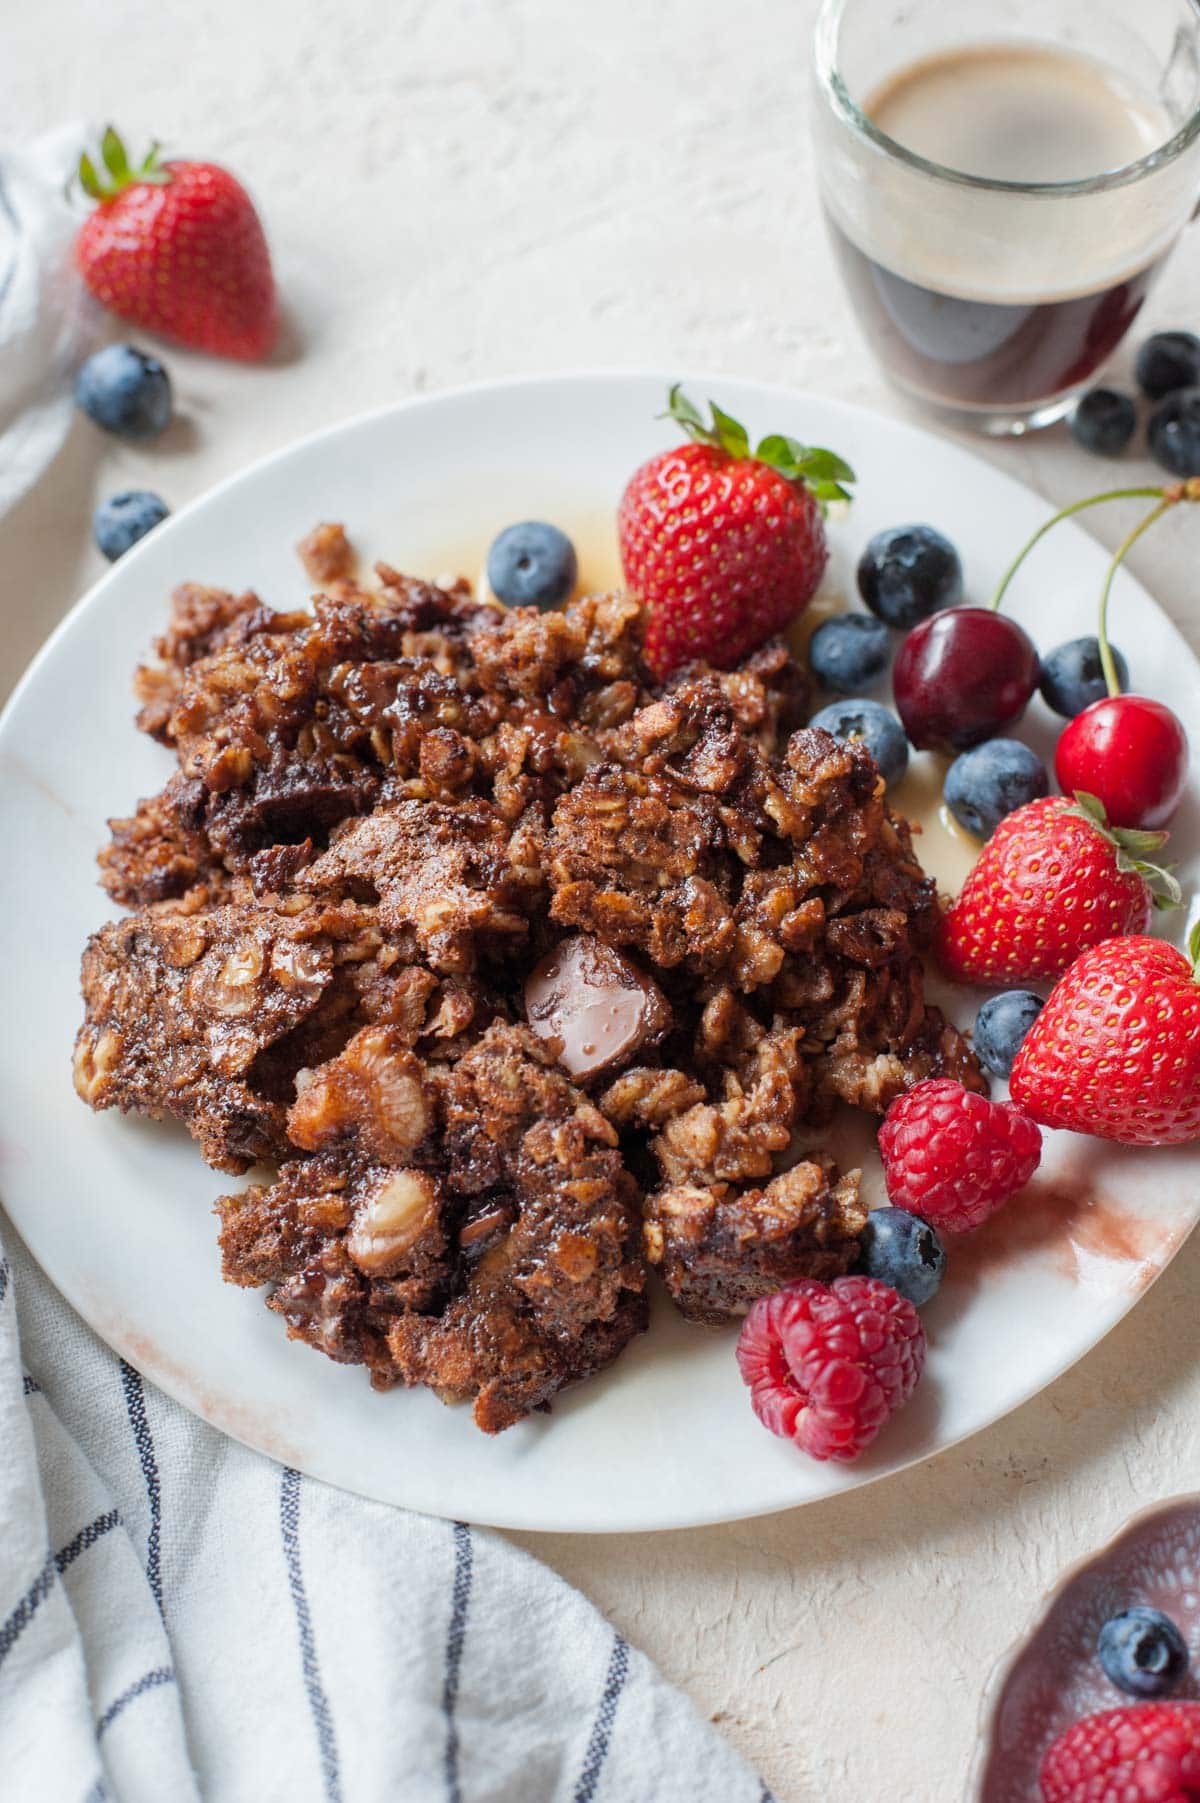 One serving of baked chocolate oatmeal served with fresh berries on a white plate.